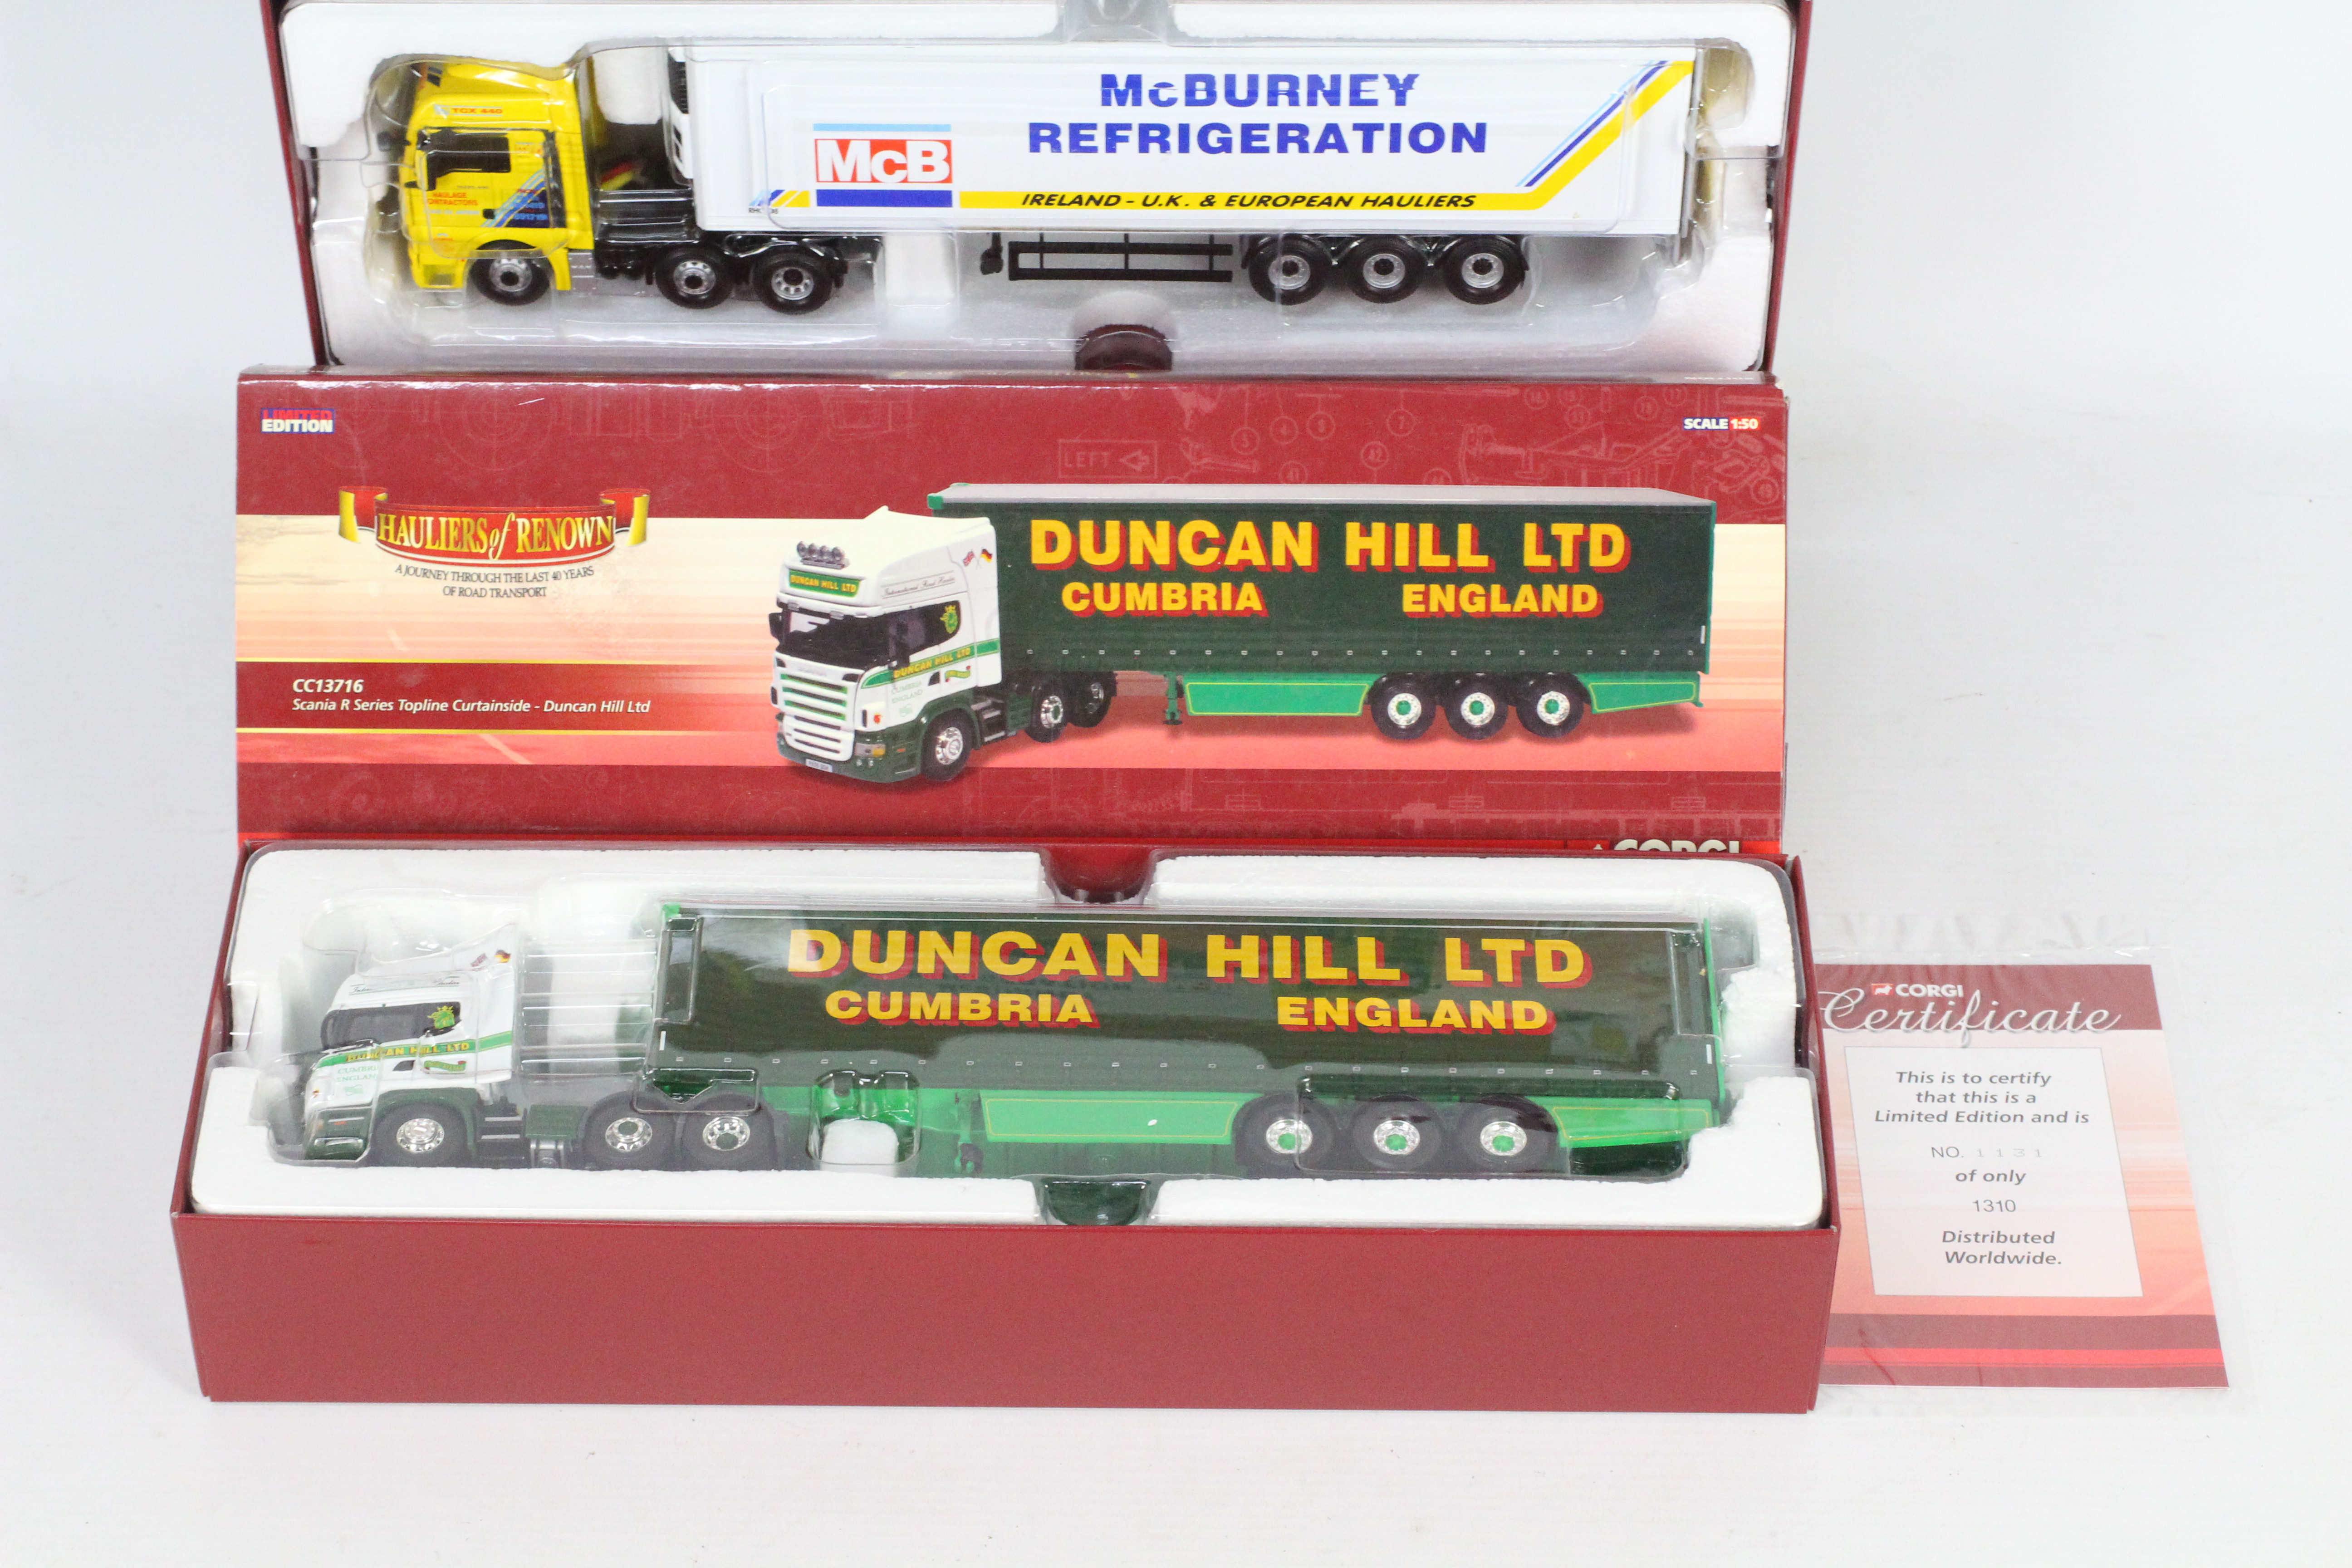 Corgi - Two boxed Limited Edition 1:50 scale diecast model trucks from Corgi's 'Hauliers of Renown' - Image 3 of 3